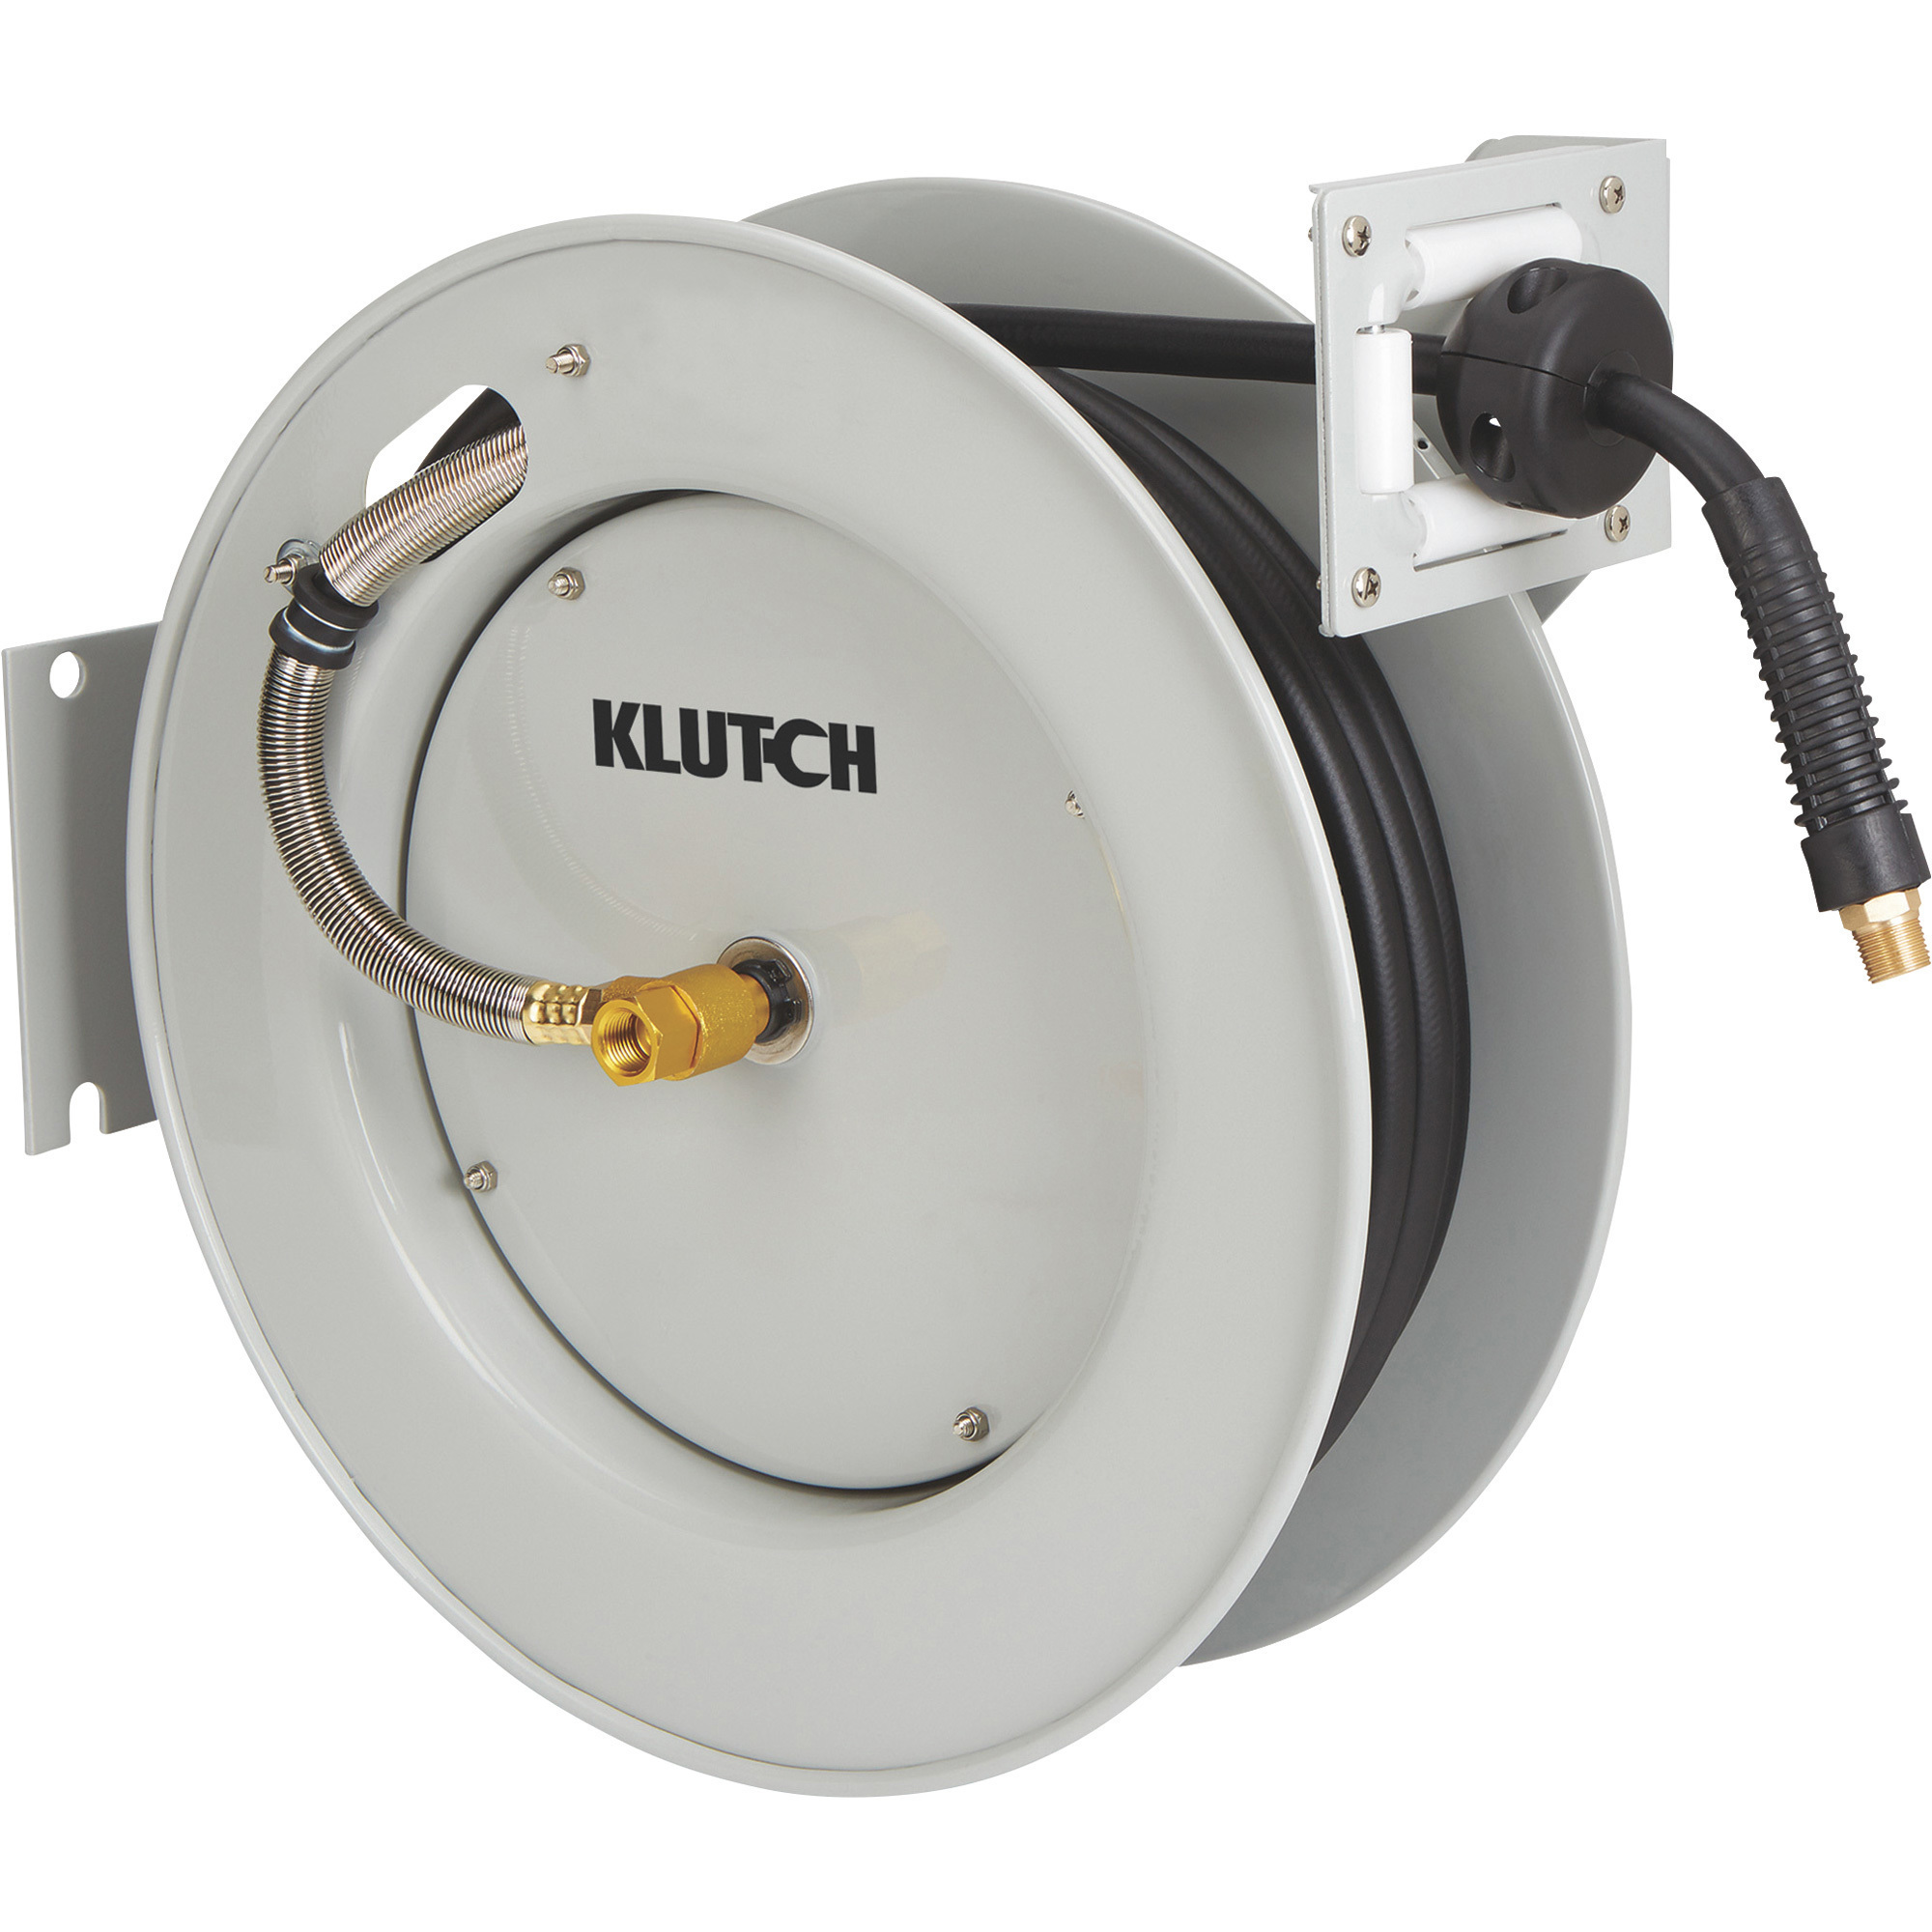 Klutch Auto-Rewind Air Hose Reel, with 3/8in. x 50ft. Hybrid Polymer Hose,  300 Max. PSI